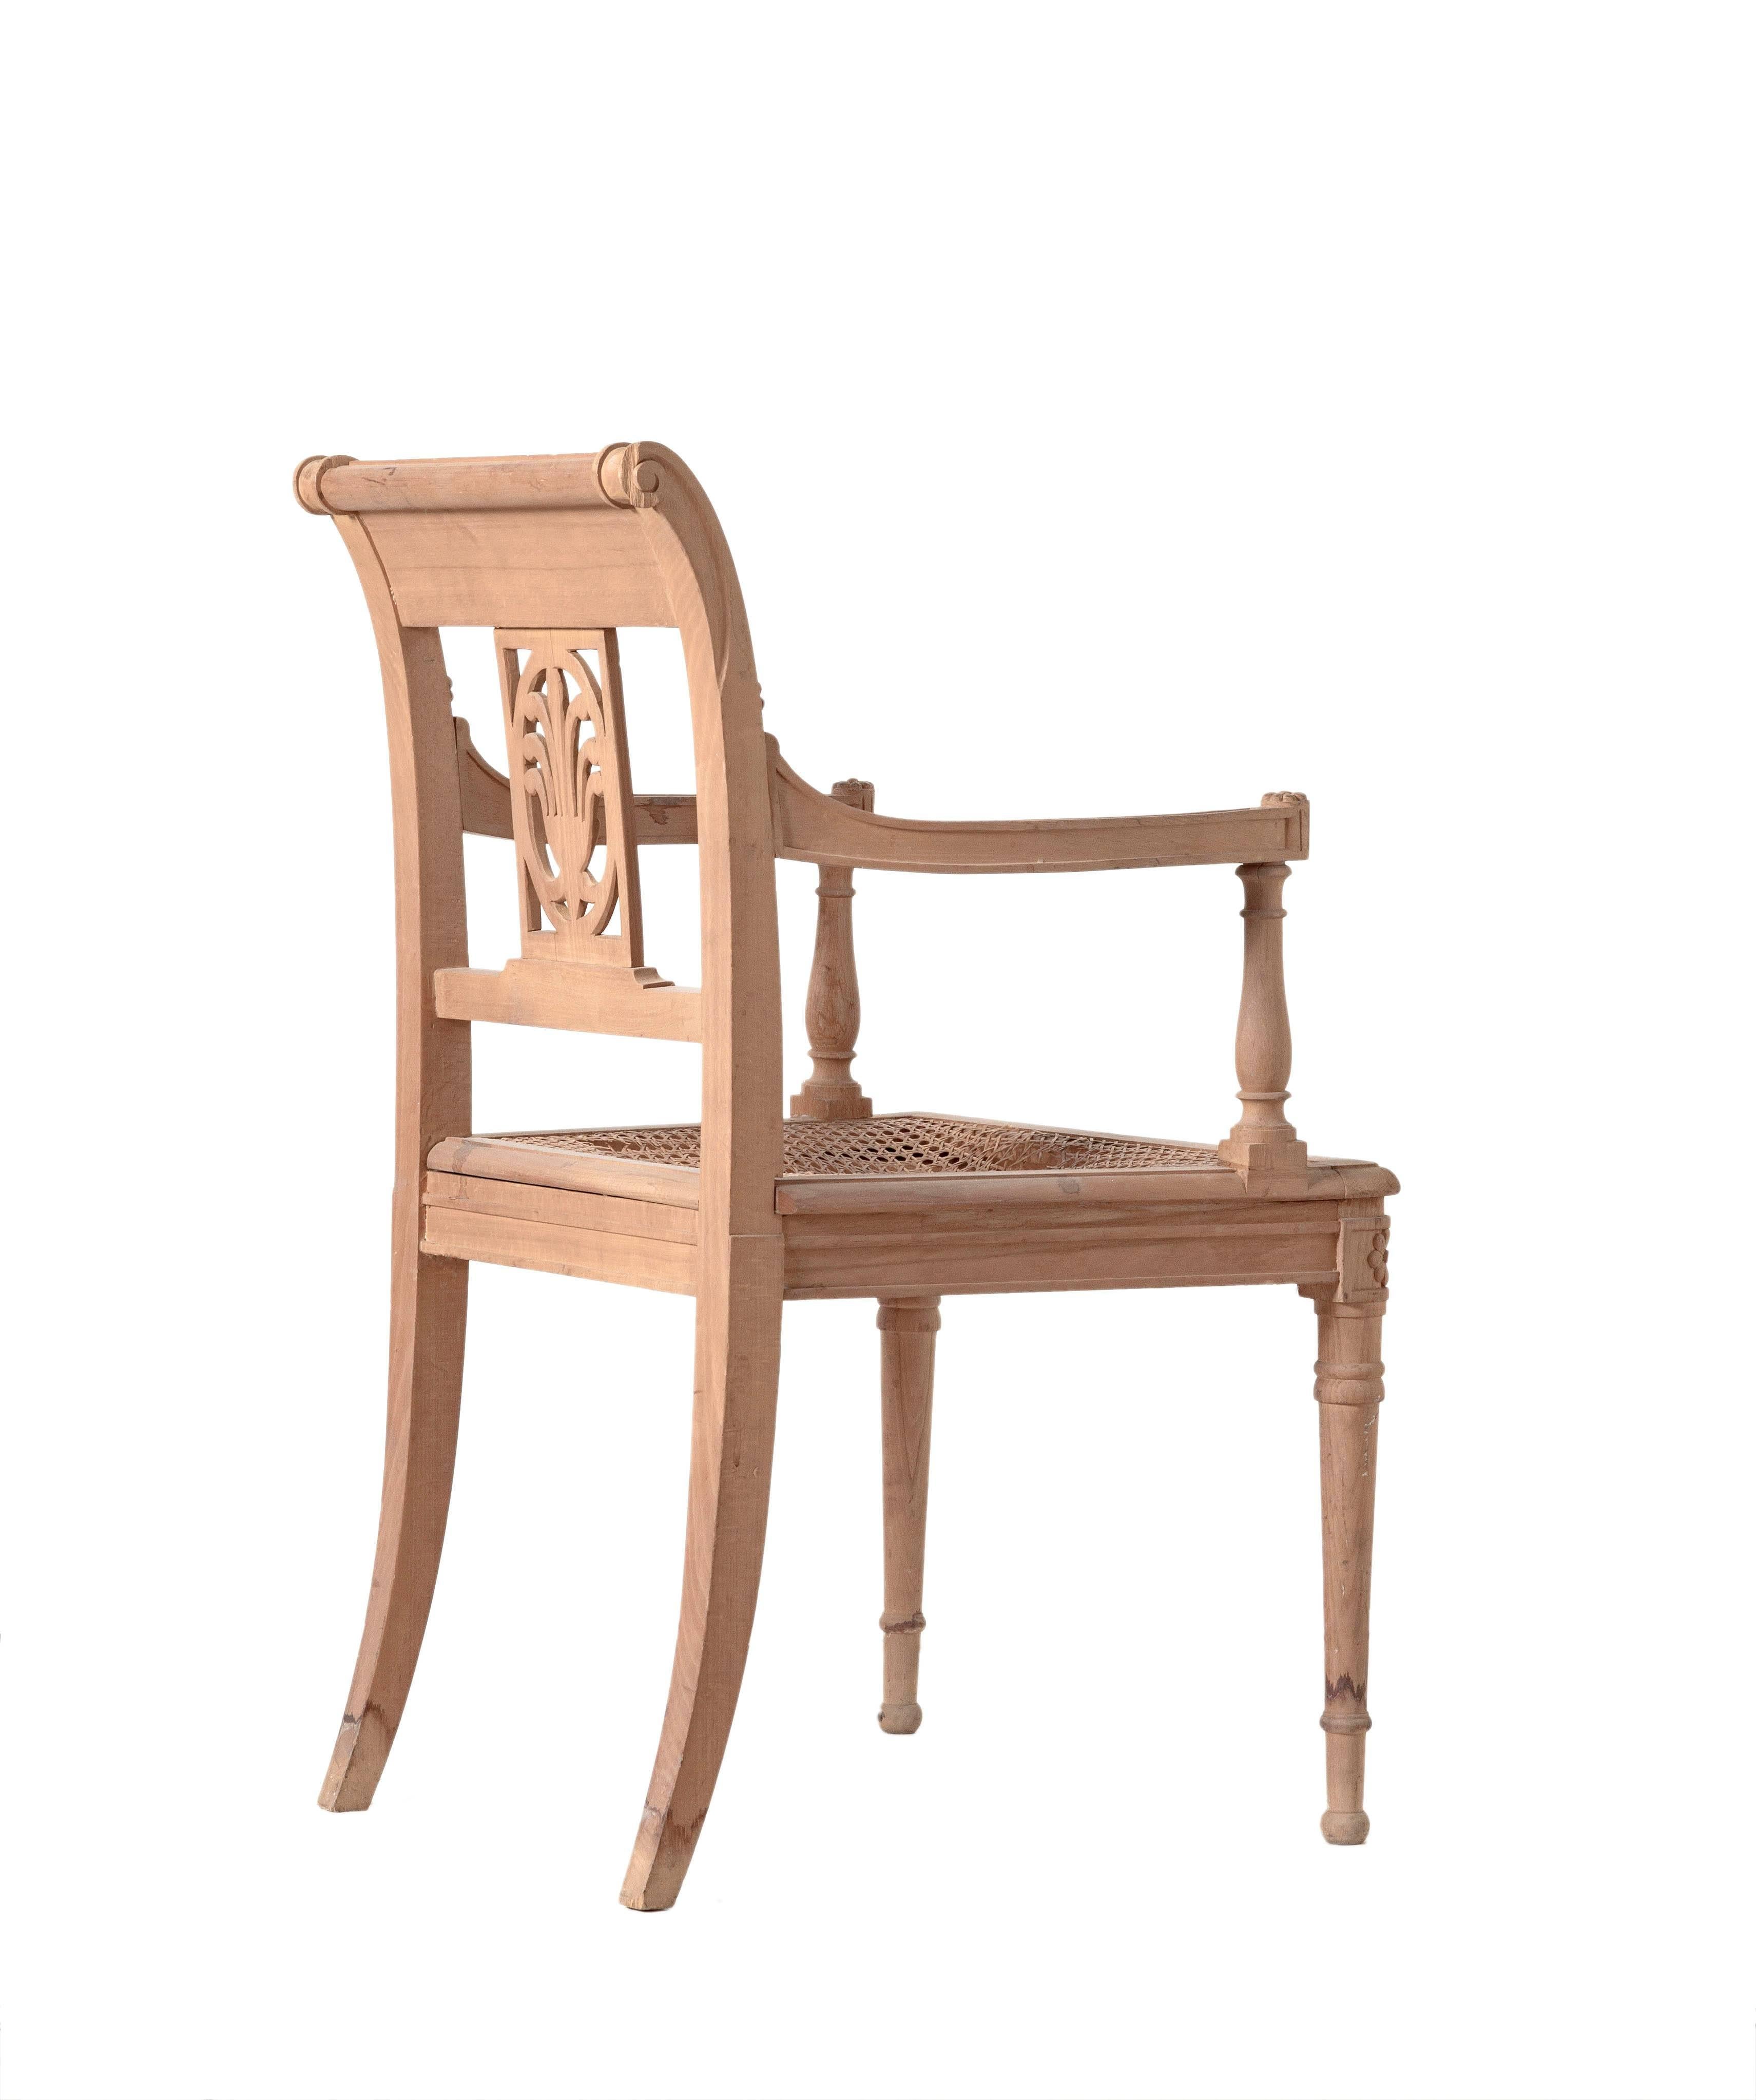 Directoire style open armchair hand-carved Italian beechwood cane seating
Cane seating broken
H. 34